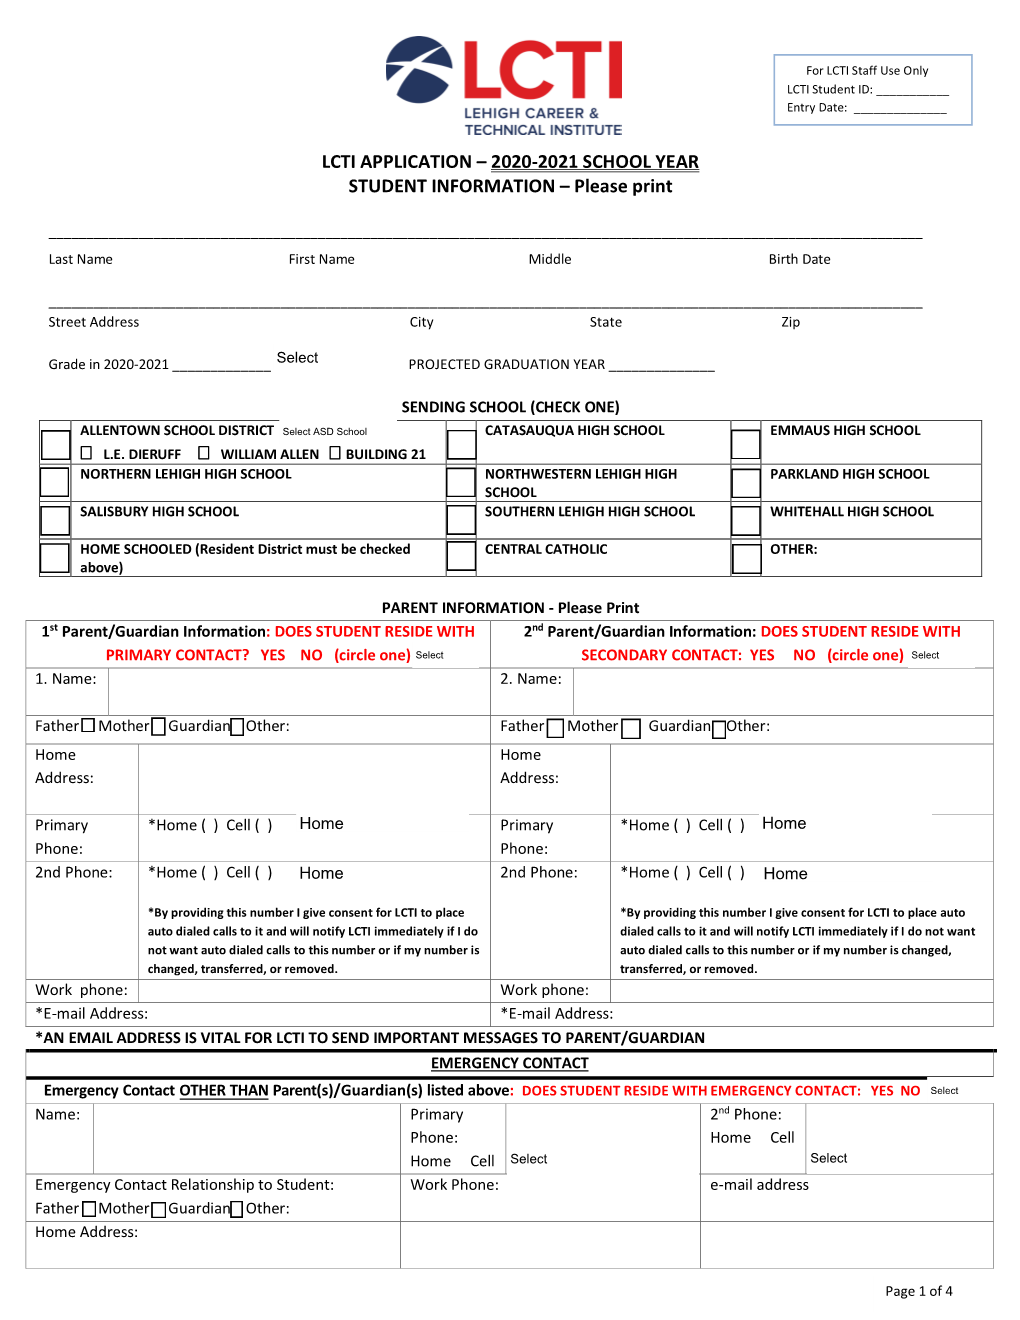 LCTI APPLICATION – 2020-2021 SCHOOL YEAR STUDENT INFORMATION – Please Print